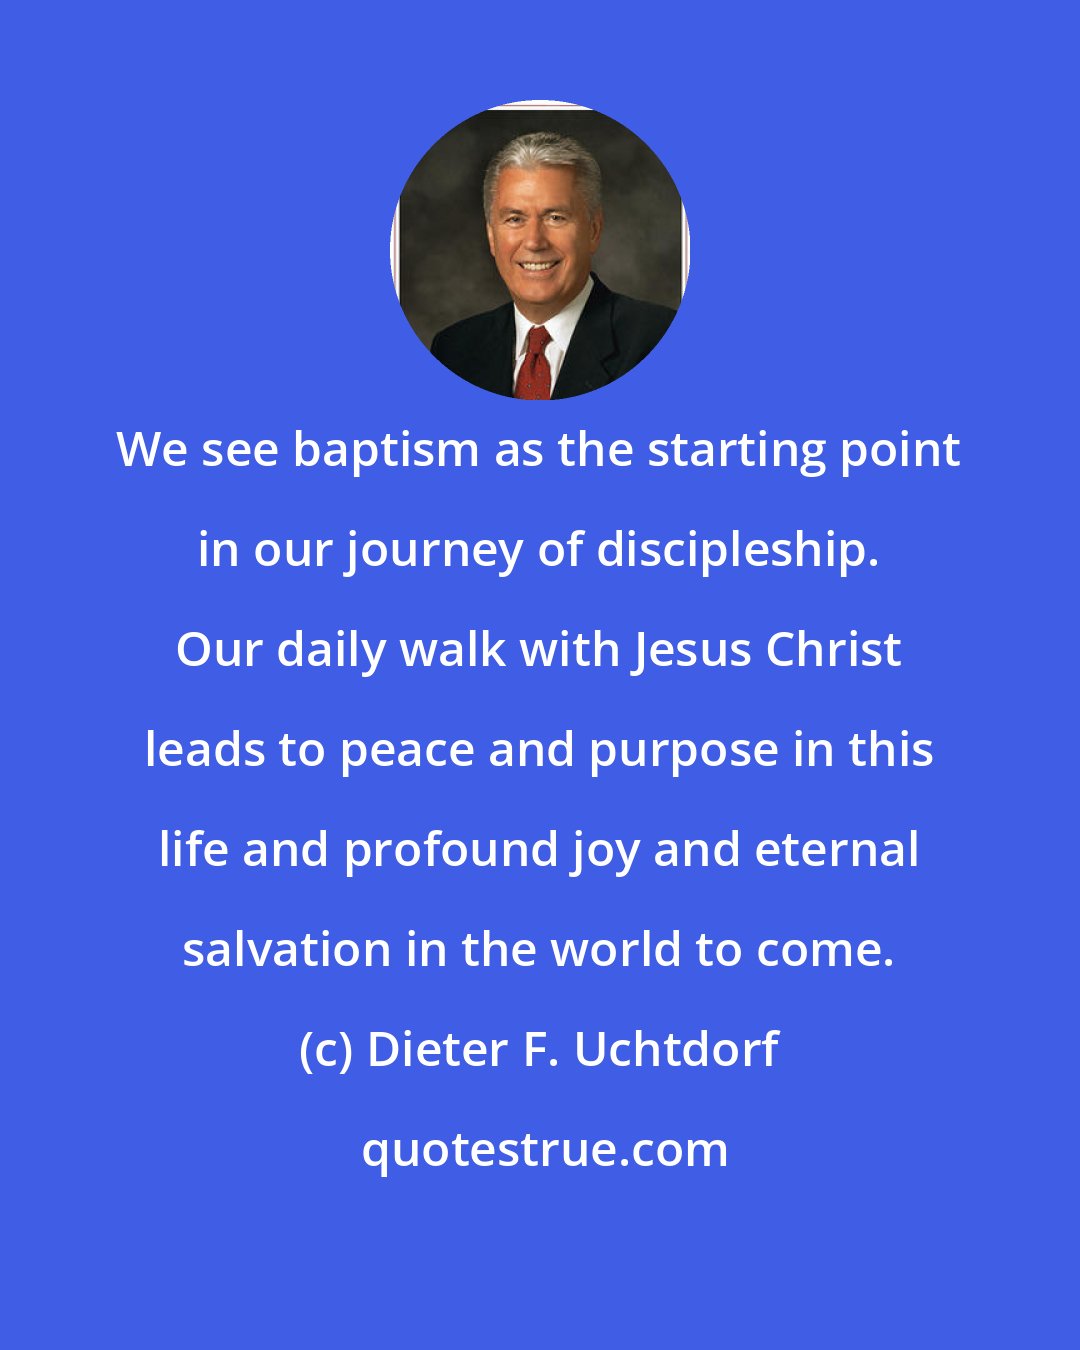 Dieter F. Uchtdorf: We see baptism as the starting point in our journey of discipleship. Our daily walk with Jesus Christ leads to peace and purpose in this life and profound joy and eternal salvation in the world to come.